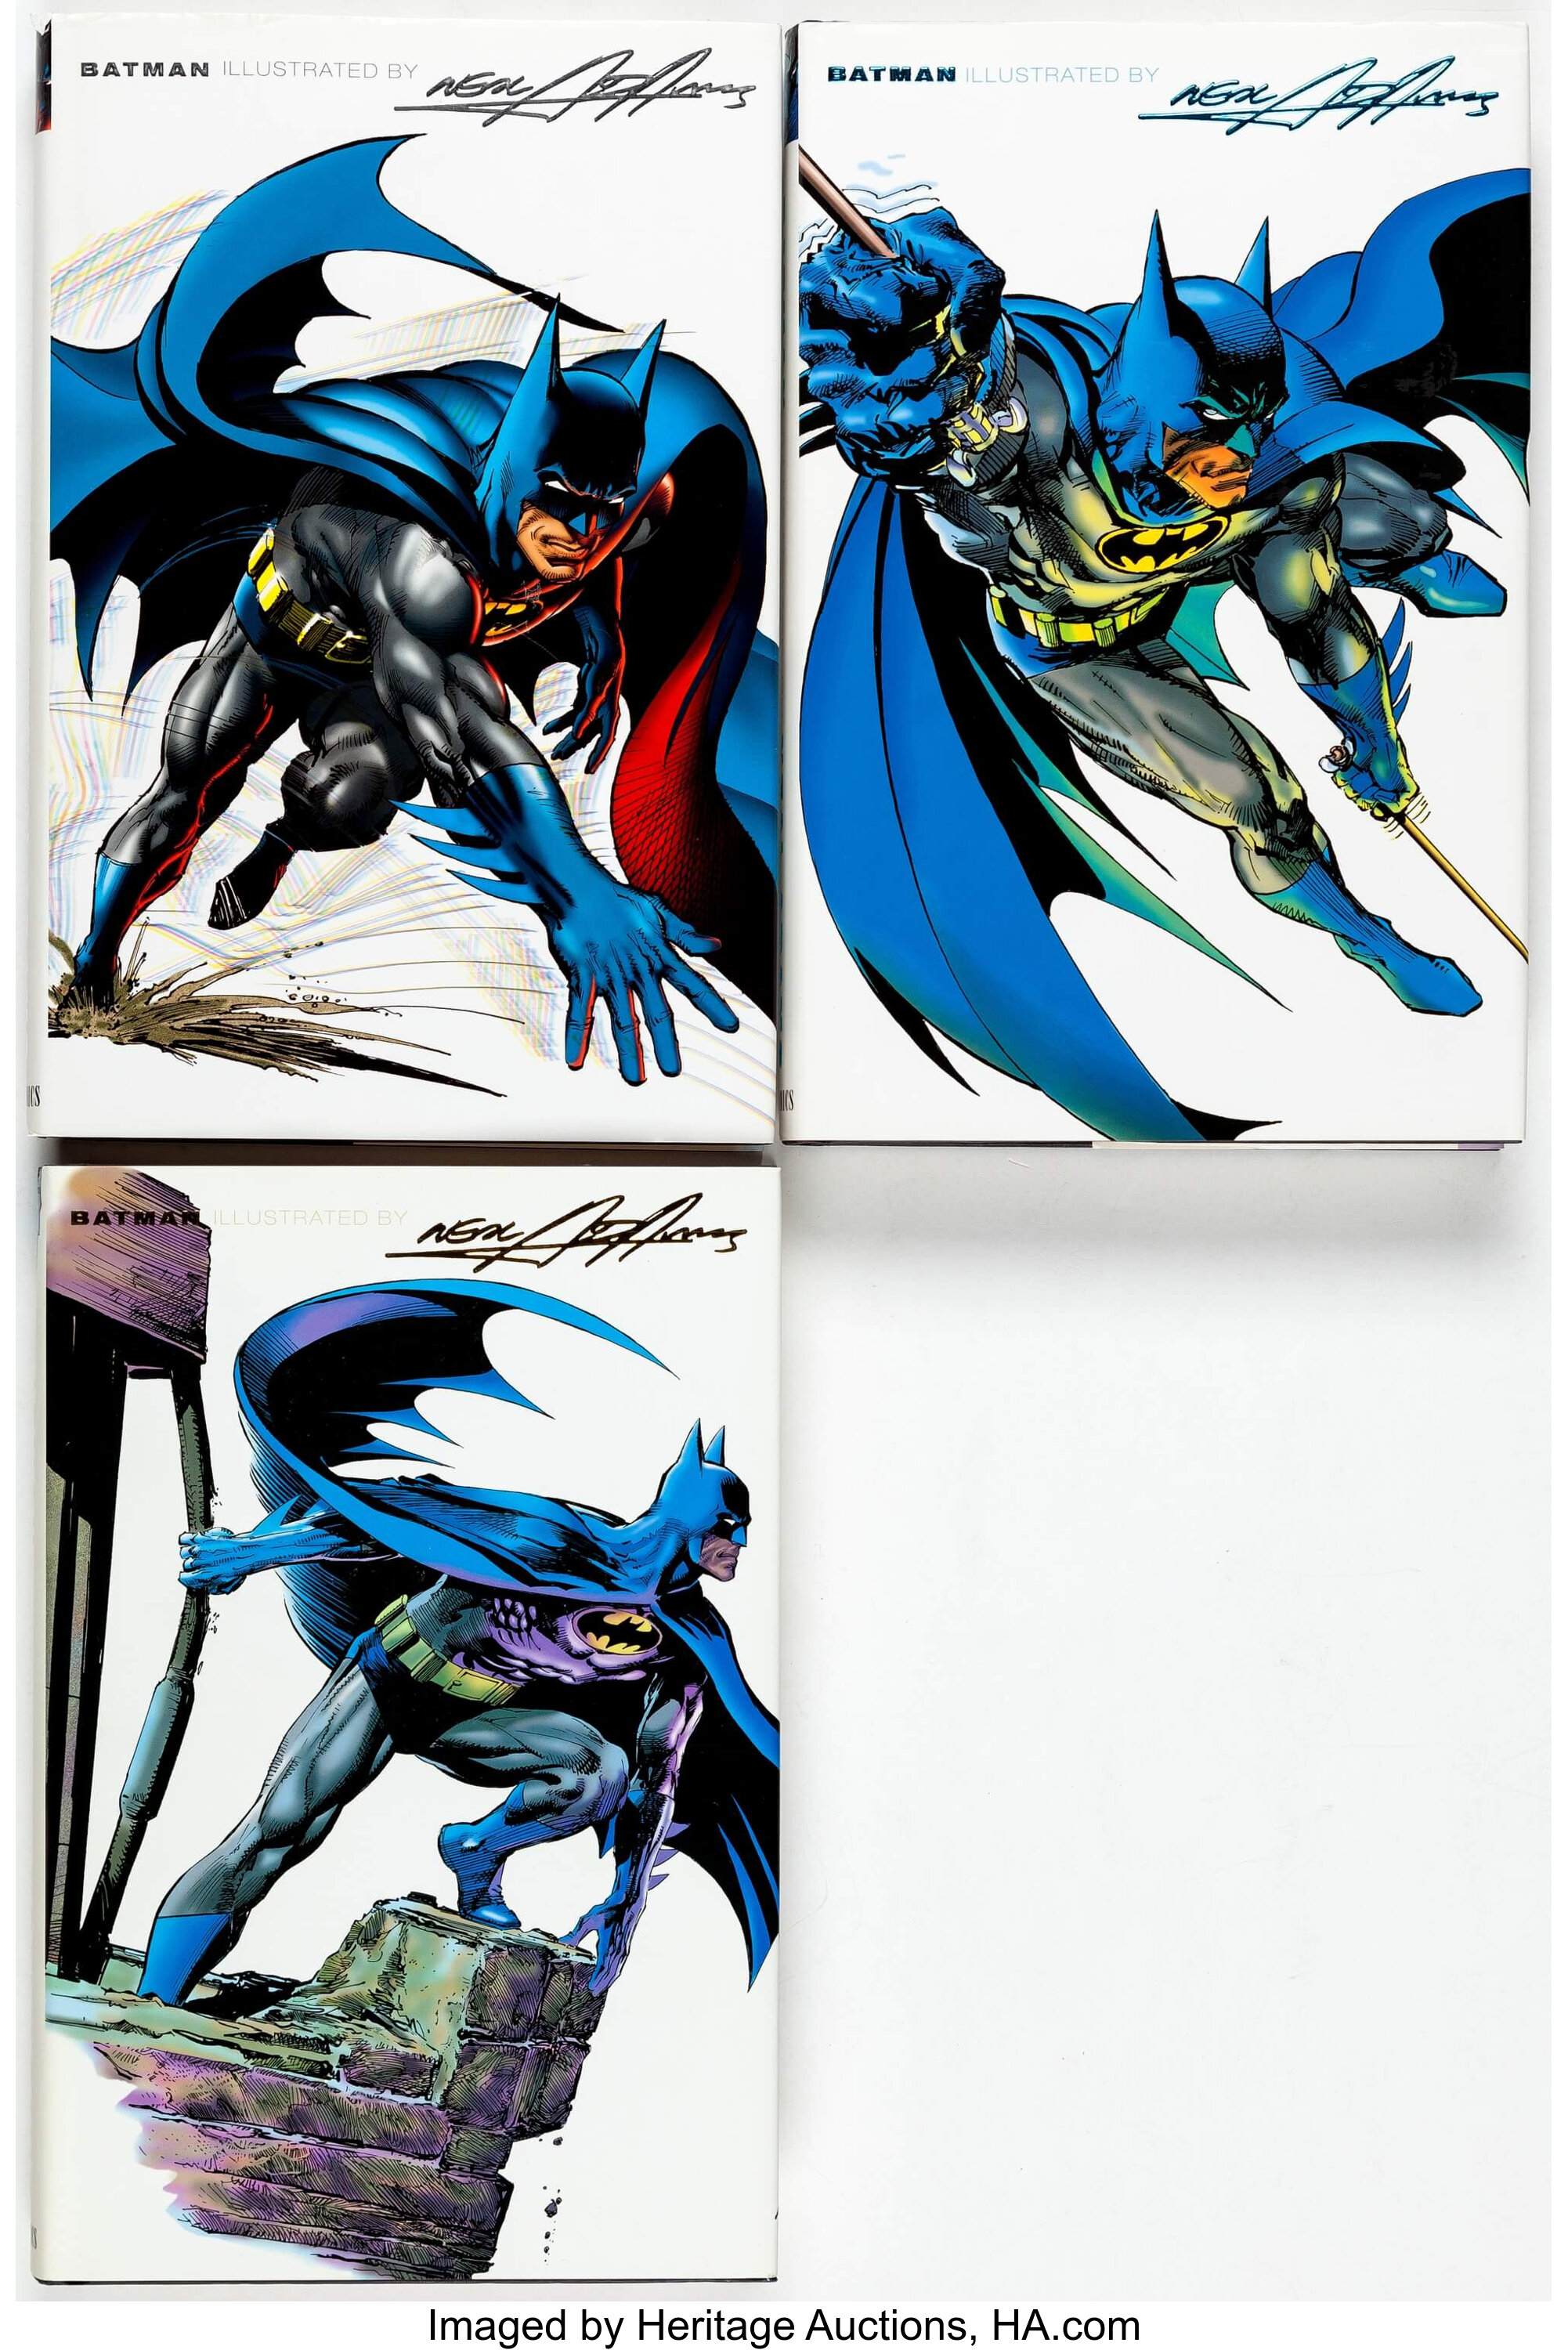 Batman Illustrated By Neal Adams Hardcover Volumes 1-3 (DC Comics, | Lot  #15646 | Heritage Auctions